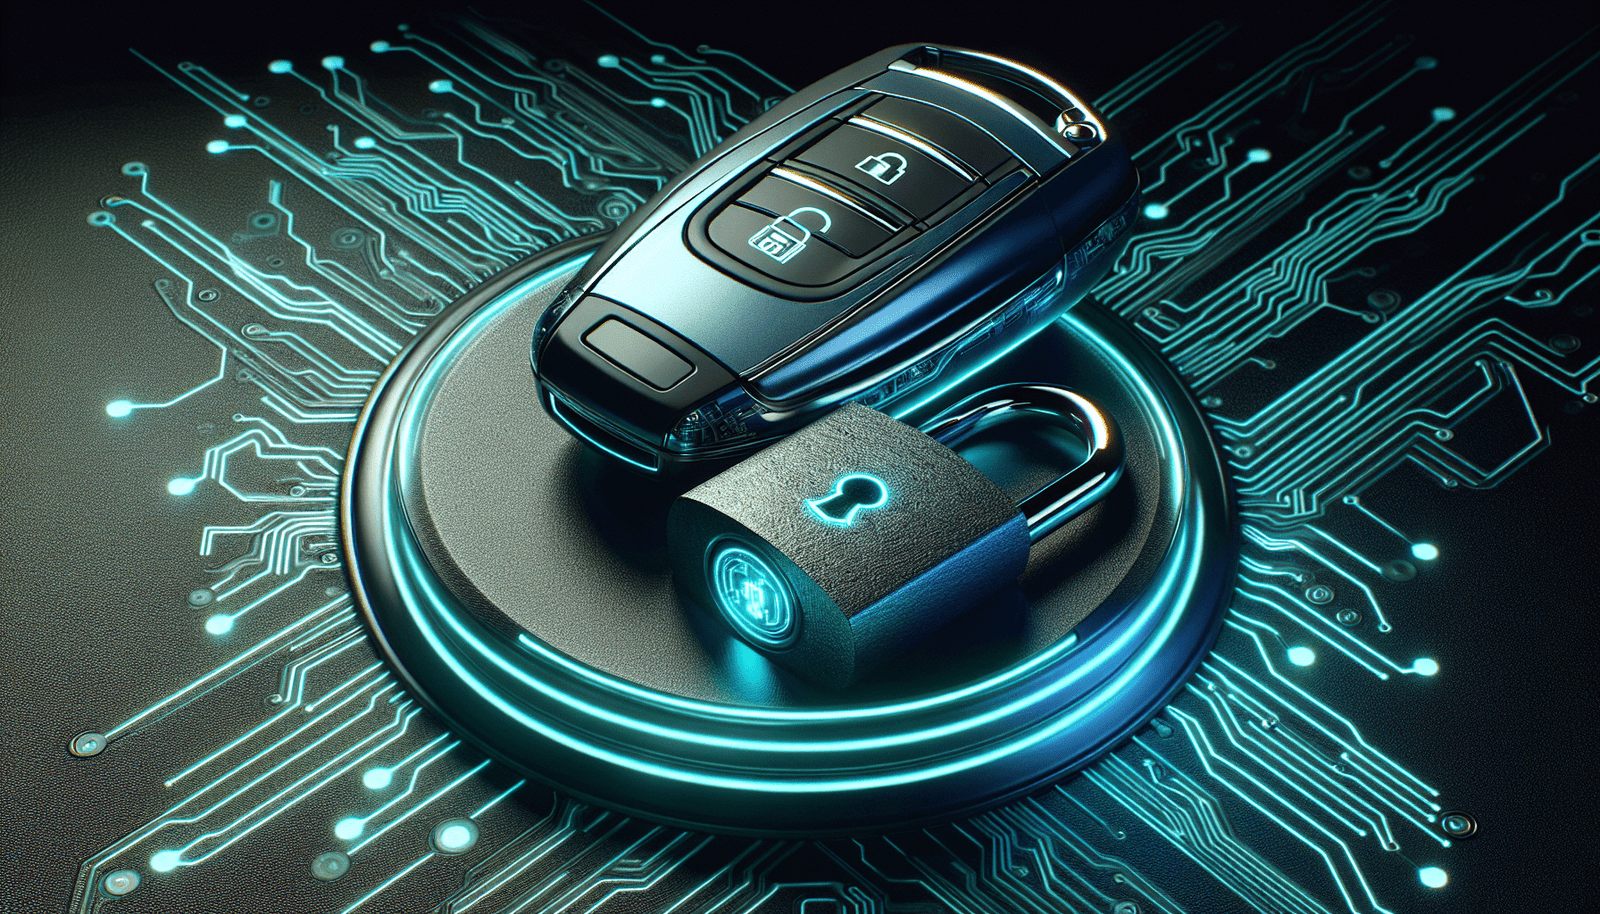 Are There Advancements In Electric Vehicle Cybersecurity Measures?